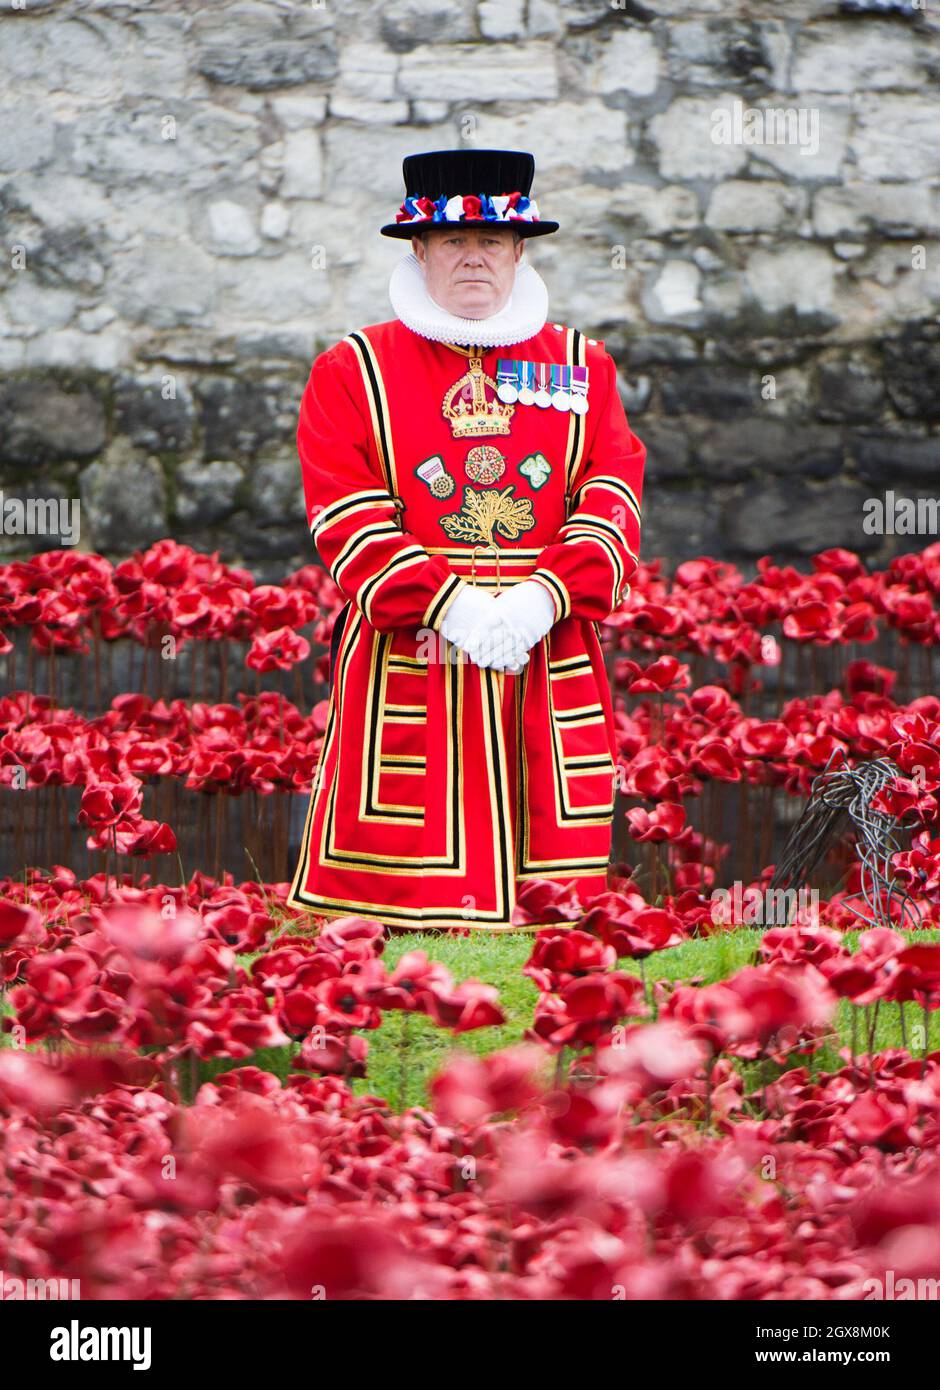 A beefeater stands amongst the ceramic poppies as Queen Elizabeth and Prince Philip visit The Blood Swept Land and Seas of Red Poppies installation at the Tower of London.  Each poppy symbolises a military fatality in World War 1. Stock Photo